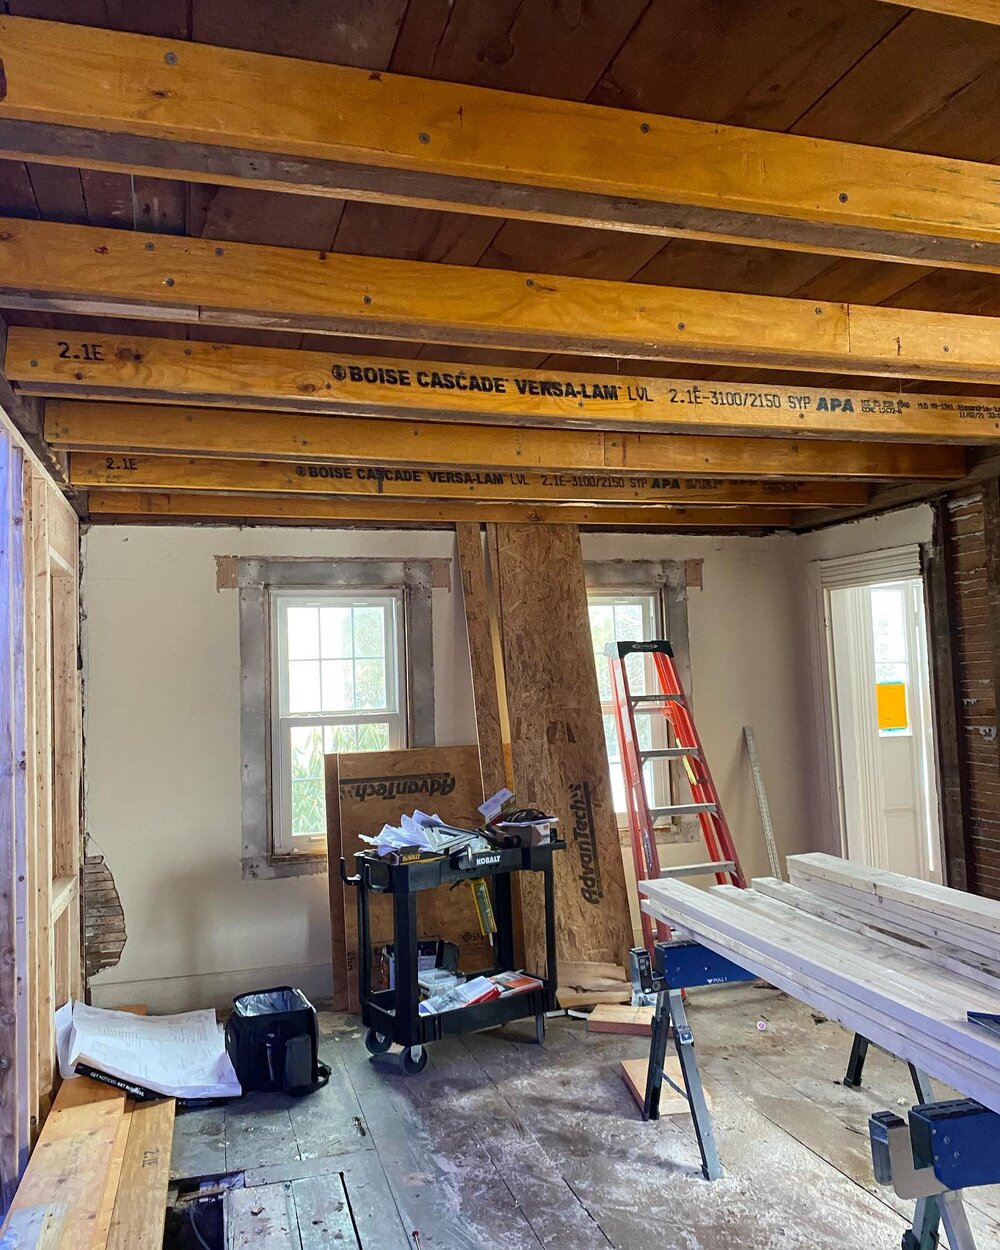 Once we got into the ceilings and walls, it became evident that this sweet little cape needed a lot more TLC than originally expected.  We&rsquo;re reinforcing that original plank and beam so the boys who&rsquo;ll move back in upstairs can jump to th